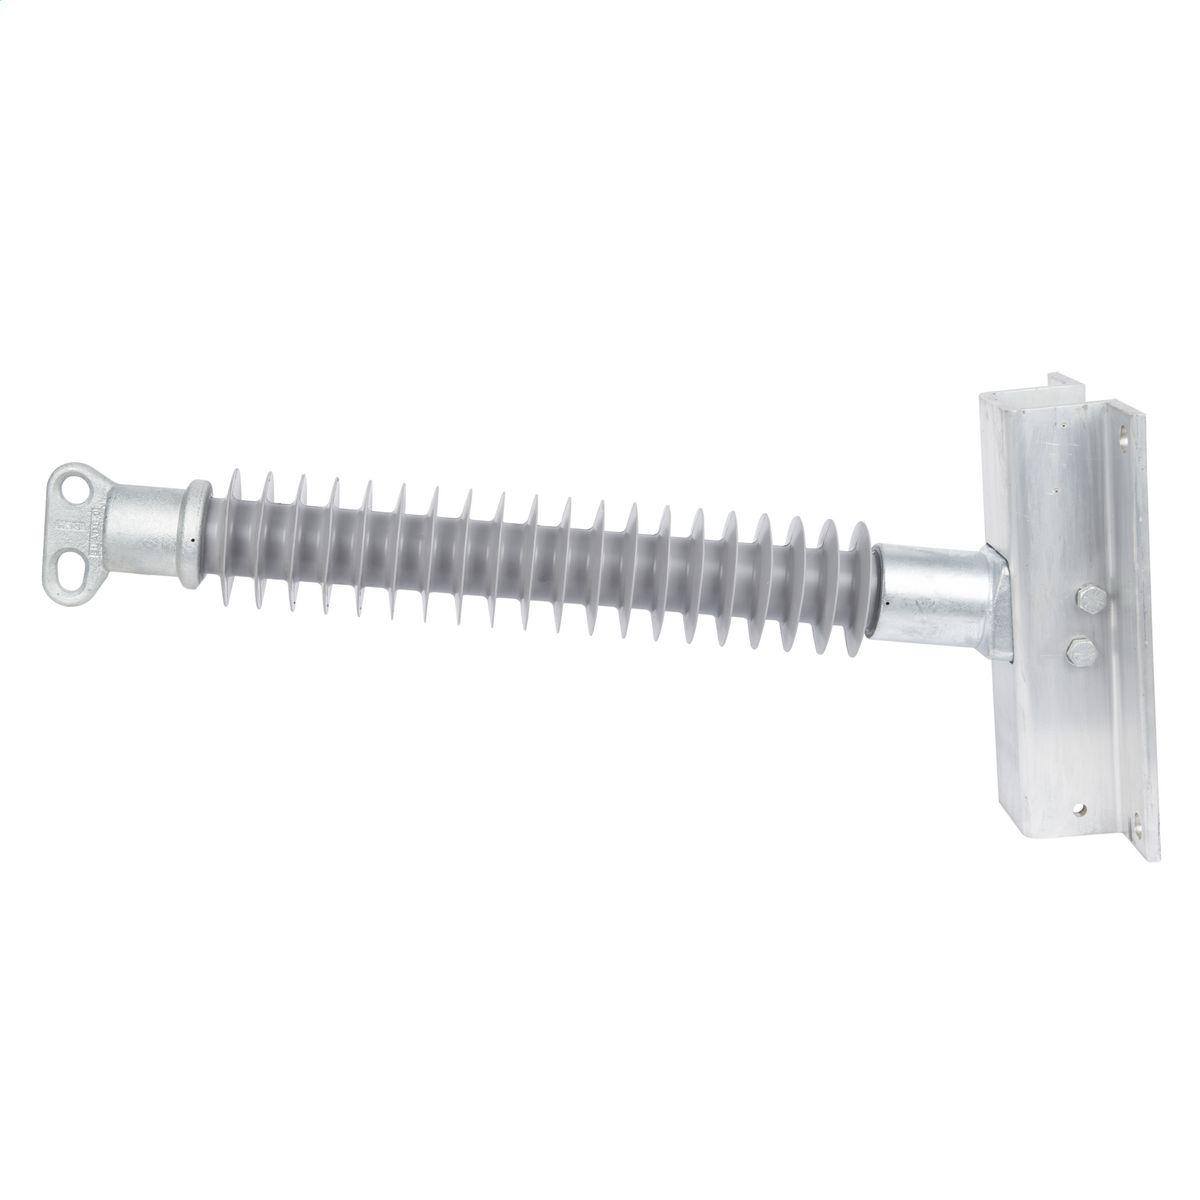 Hubbell P300036S0080 3.0" Line Post, 2 hole blade, Steel Flat base 9x13 7/8" bolts  ; Made from hydrophobic silicone polymer ; 